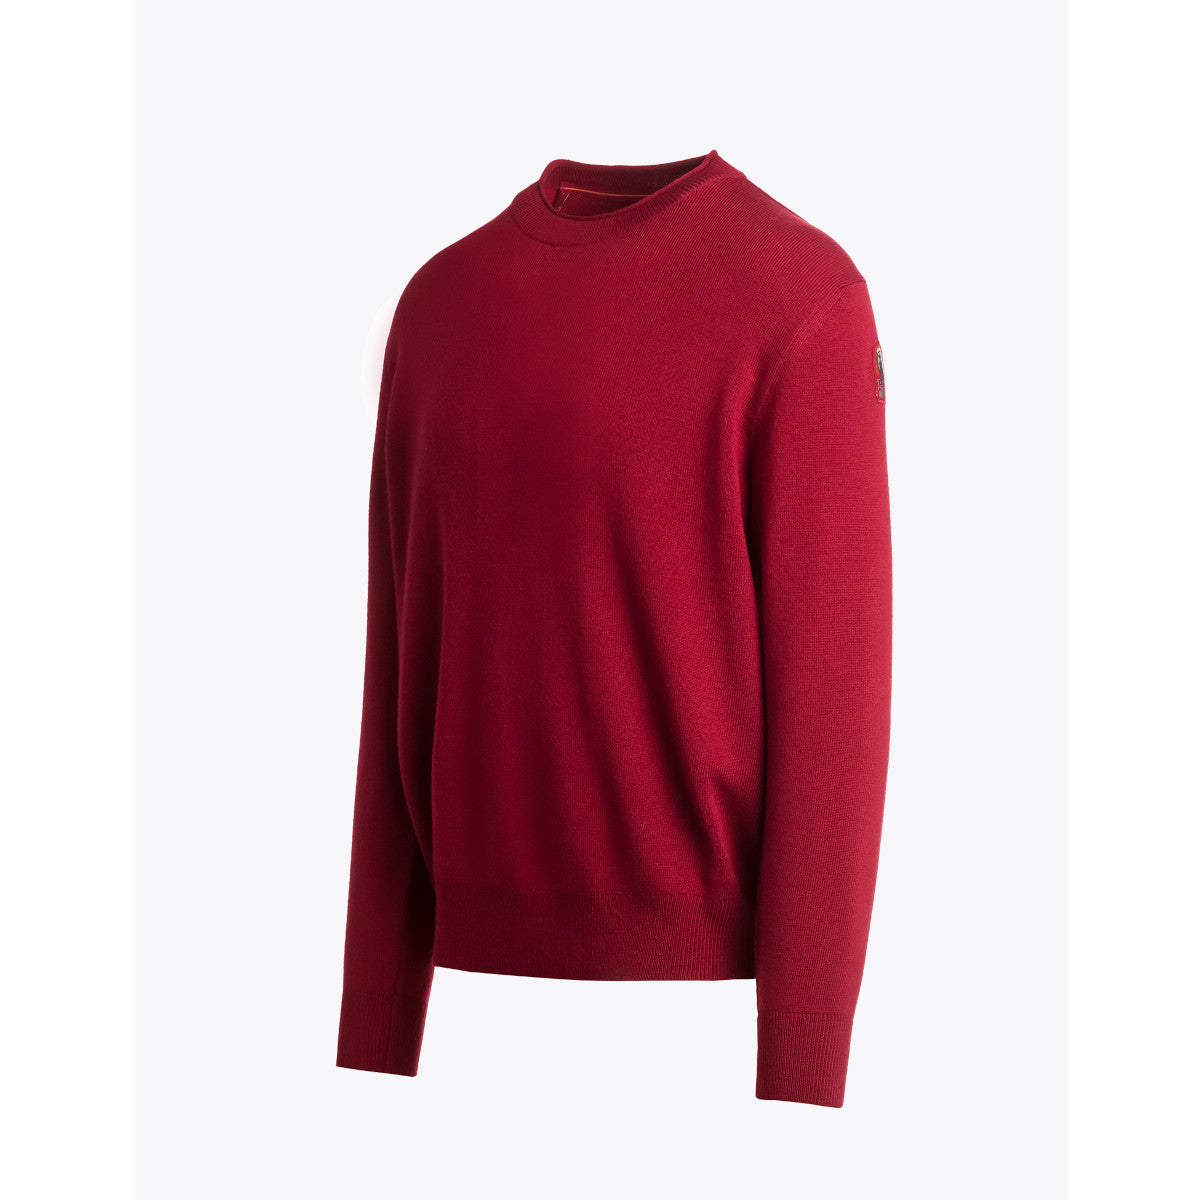 Parajumpers Wallace Crew Neck Knitwear 310 Rio Red